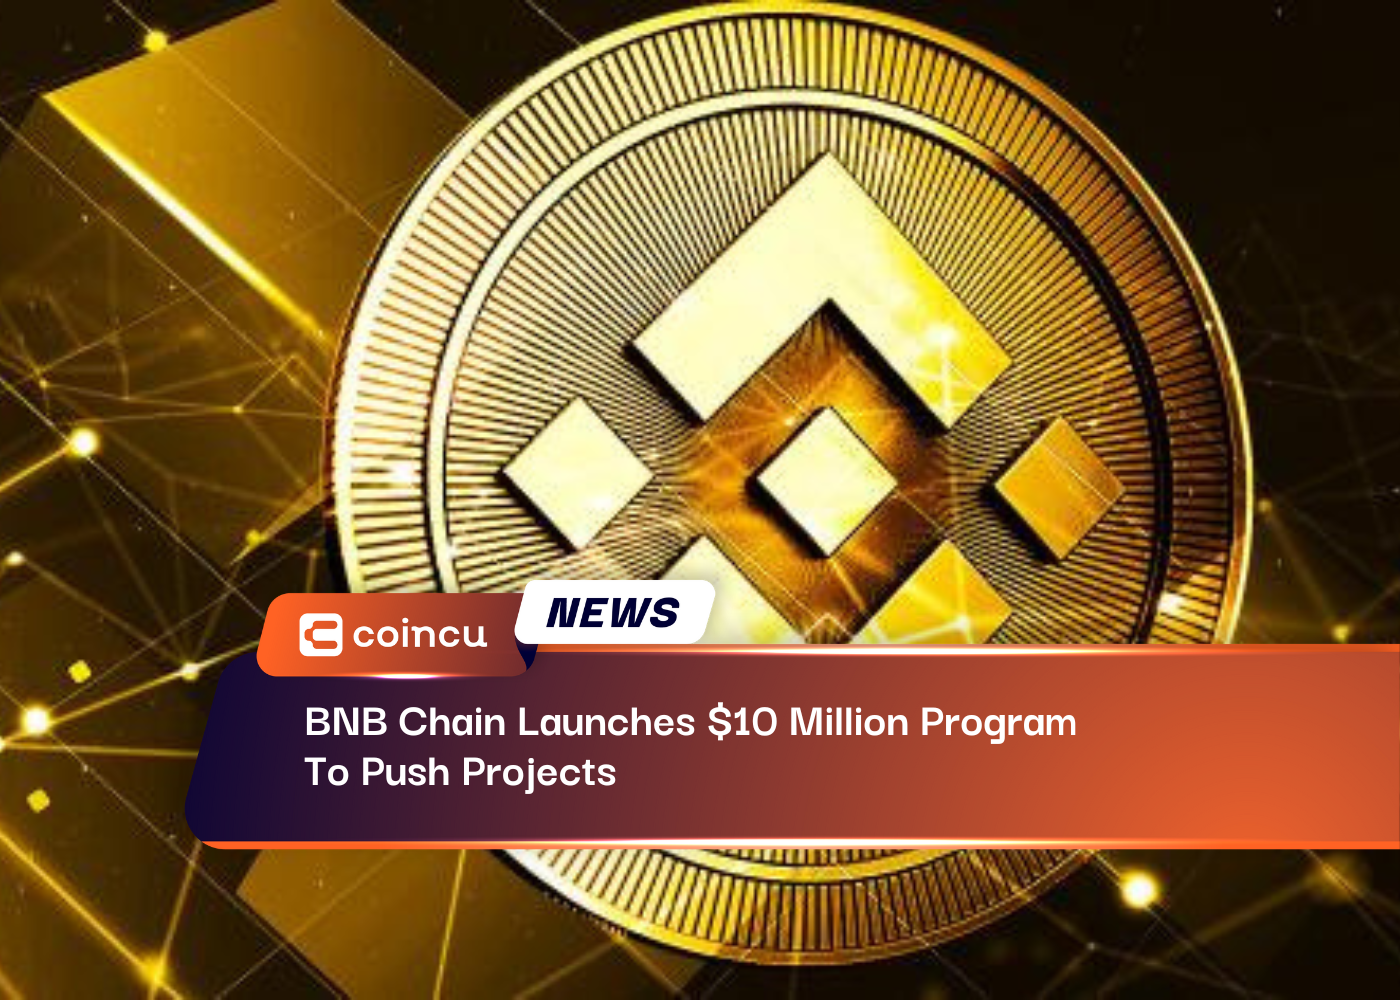 BNB Chain Launches $10 Million Program To Push Projects